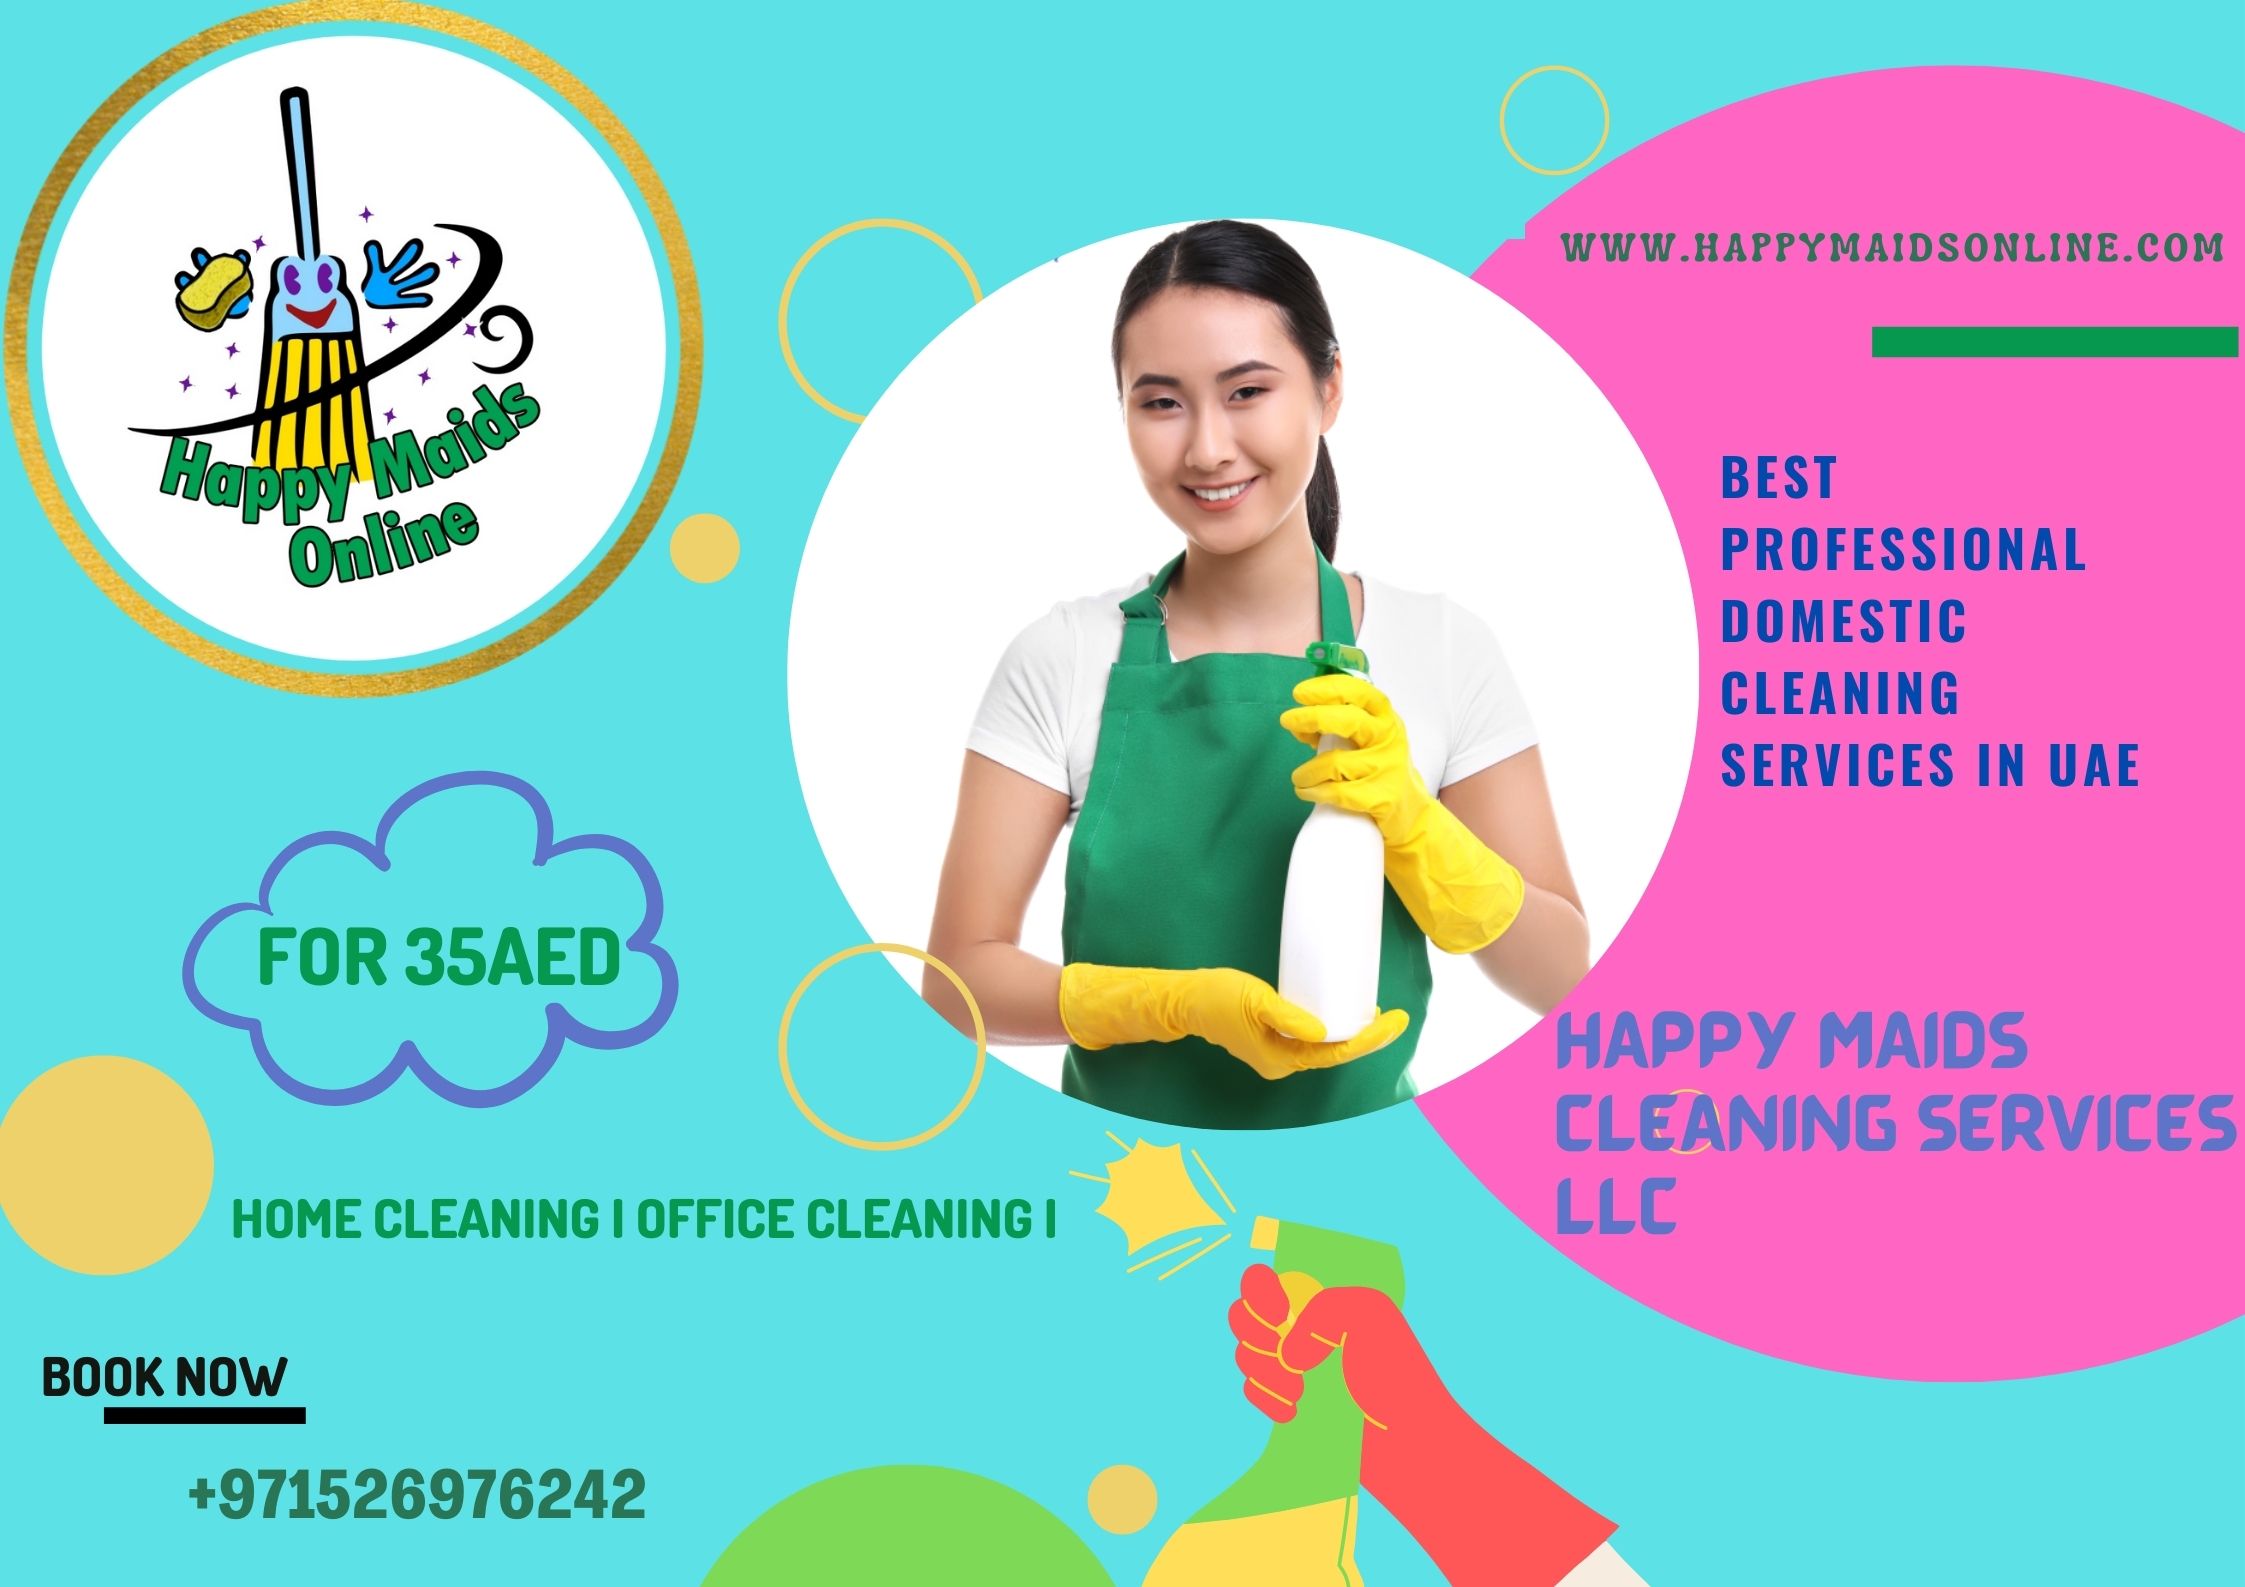 Happy maids Cleaning Services LLC